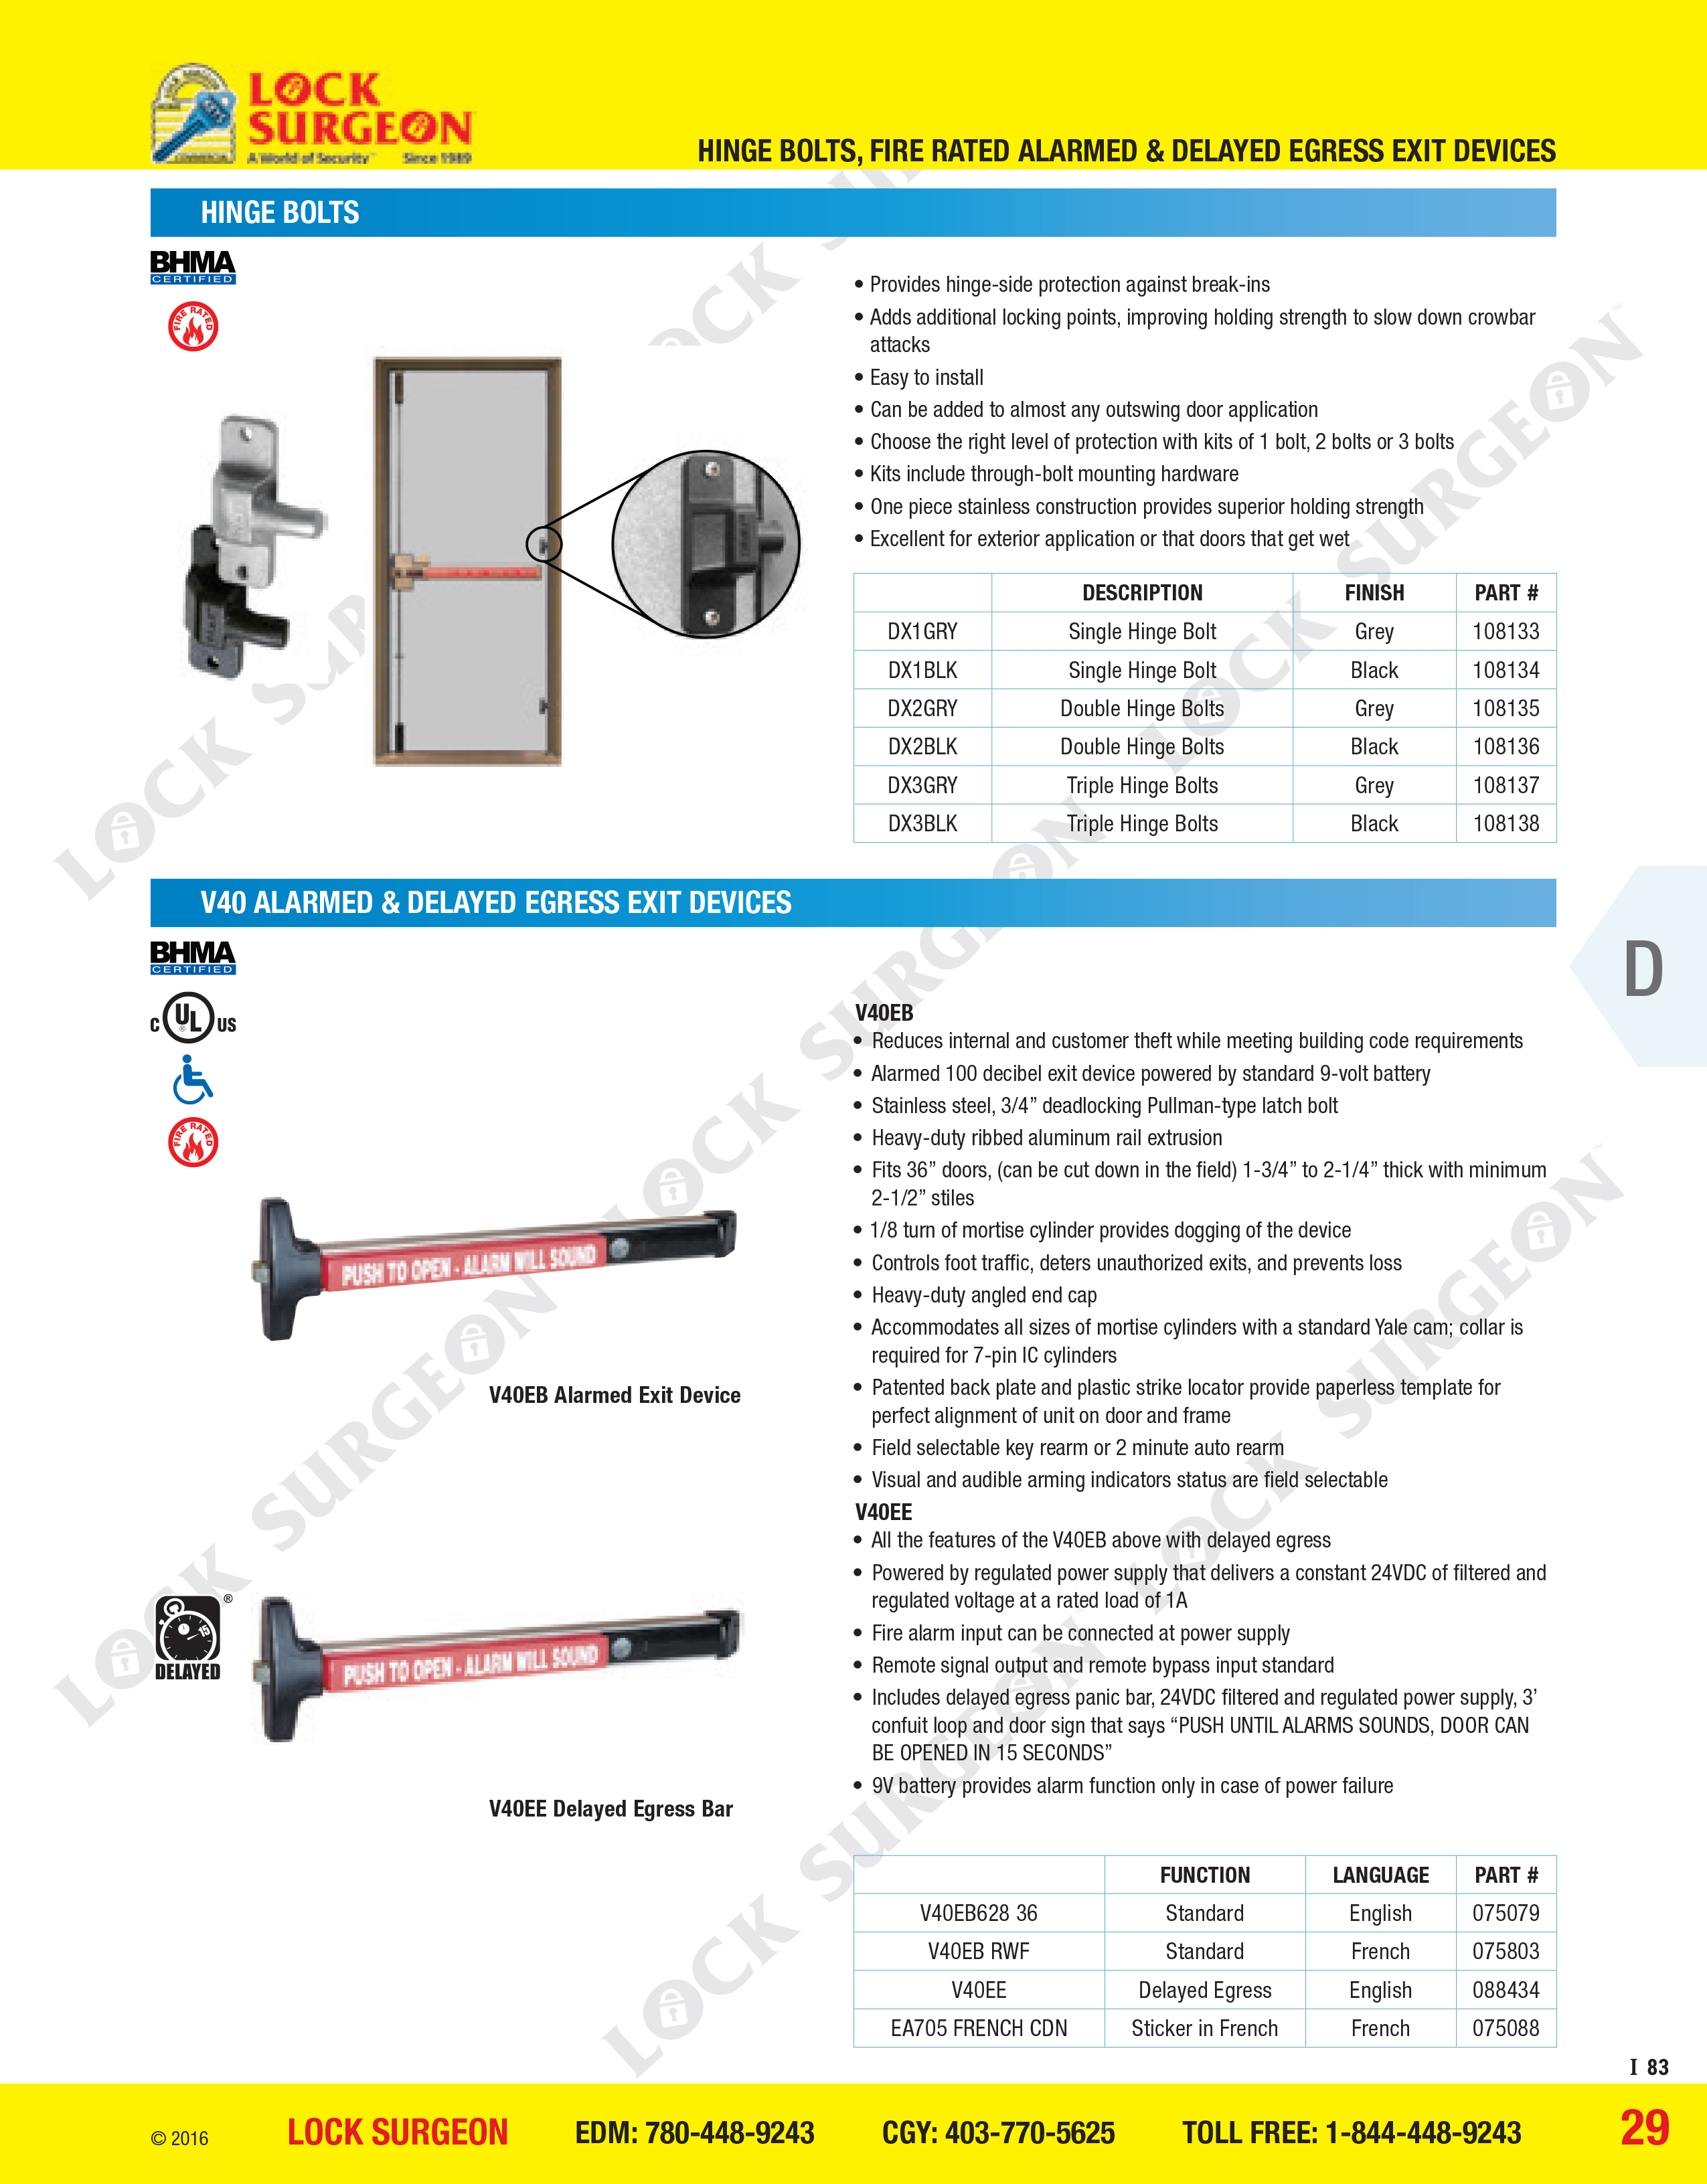 Detex Hinge bolts, Fire rated alarmed & V40 Alarmed and delayed egress exit devices at Lock Surgeon.